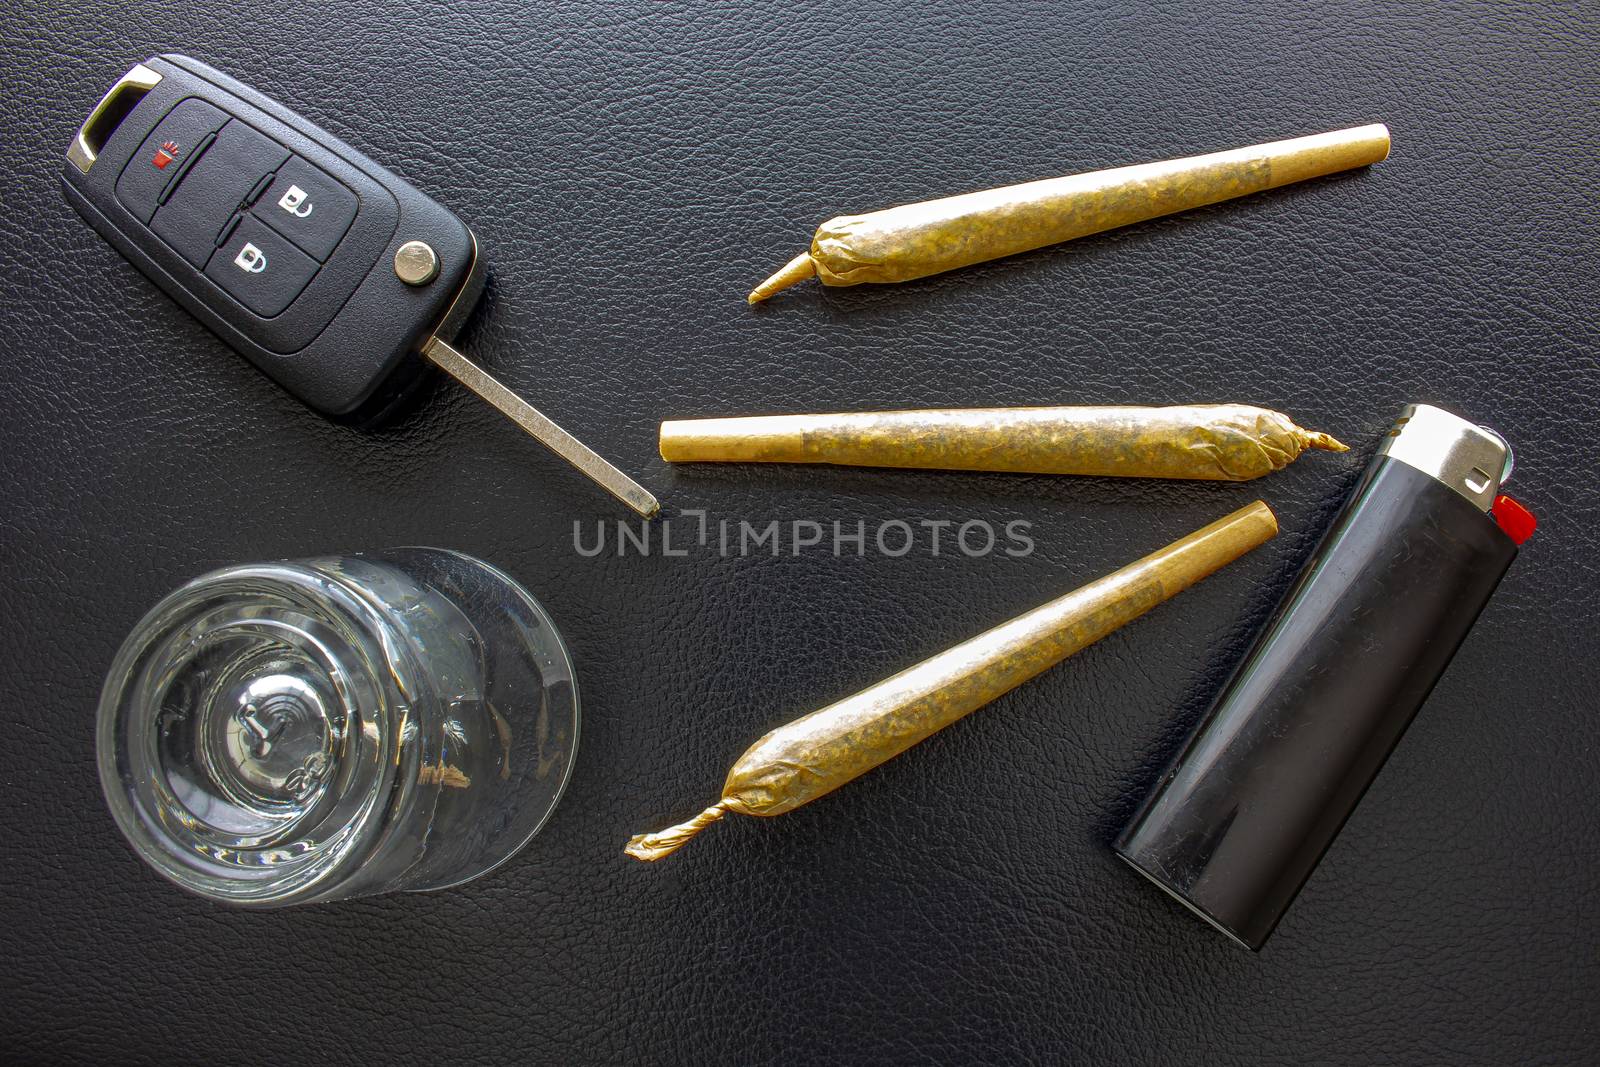 Cannabis Joints Cigarettes with car key, a shoot glass and a lighter on a leather black texture. Concept driving high. Drug-impaired driving is dangerous and against the law by oasisamuel